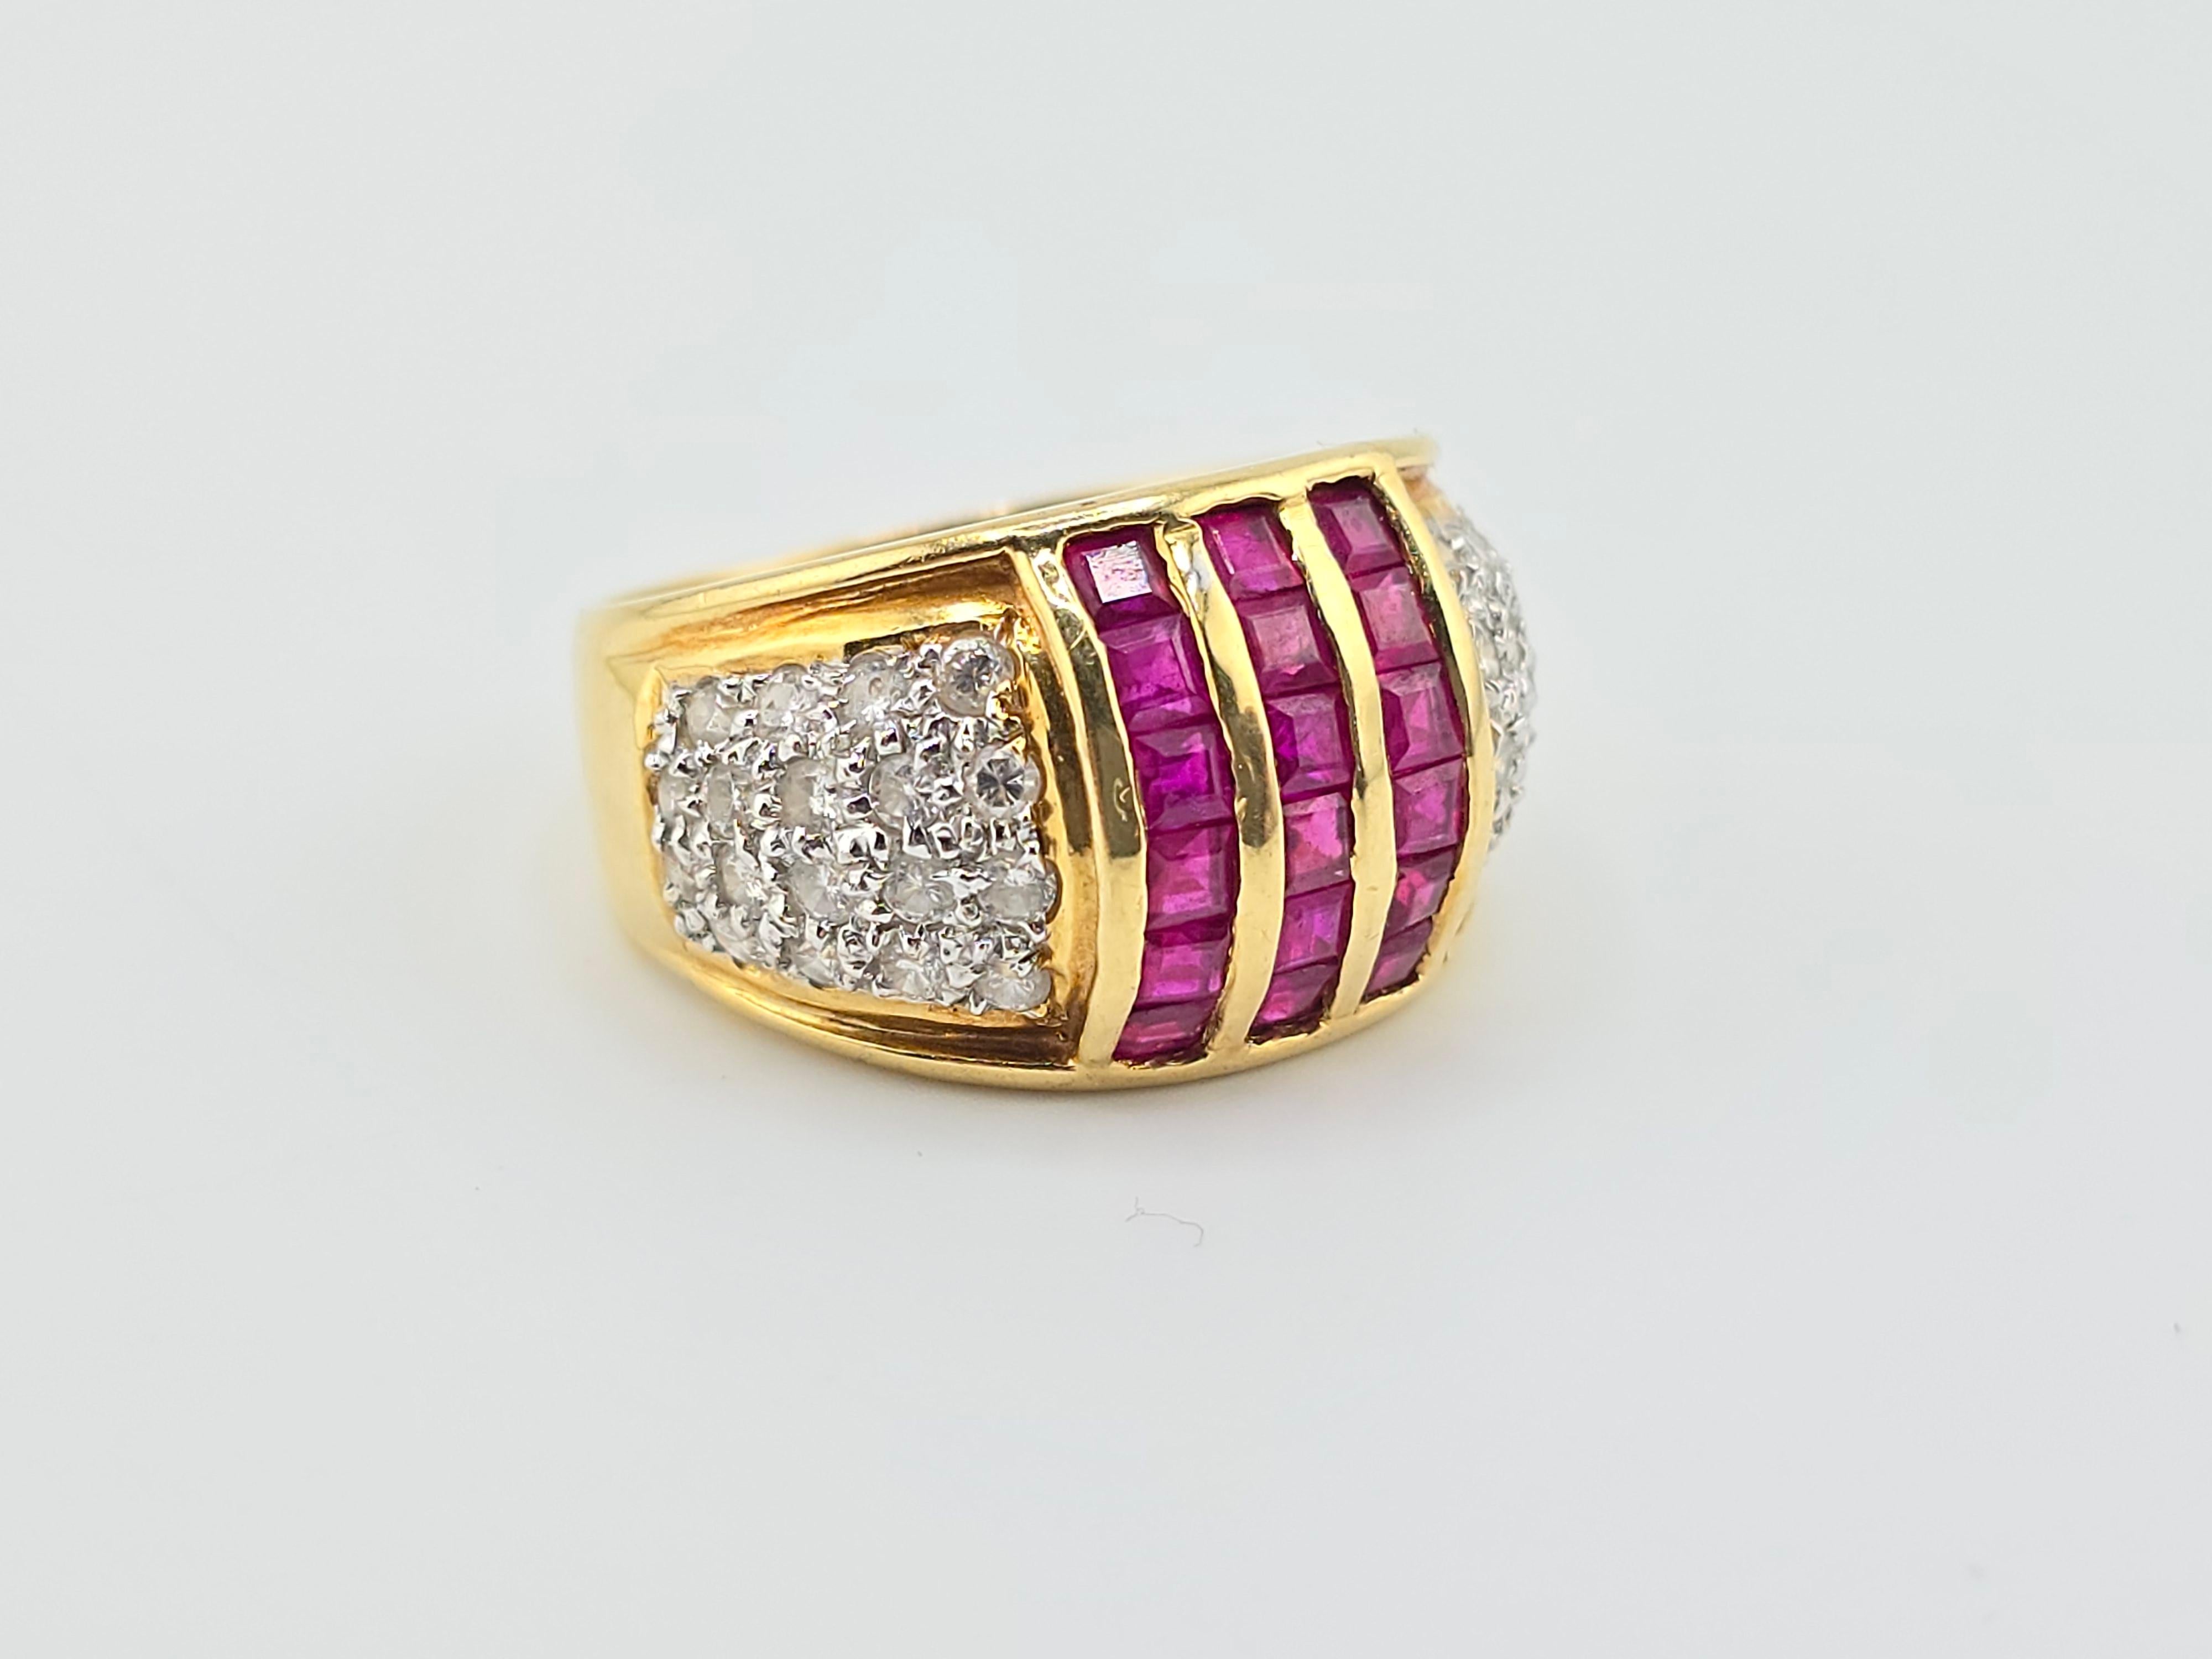 This is a marvelous ruby and diamond yellow gold ring made out of fine 18 karat gold. The quality on the diamonds are great with a mix of  VS to SI clarity.  The rubies have a nice even purplish red color to it. Diamonds on the other hand have a